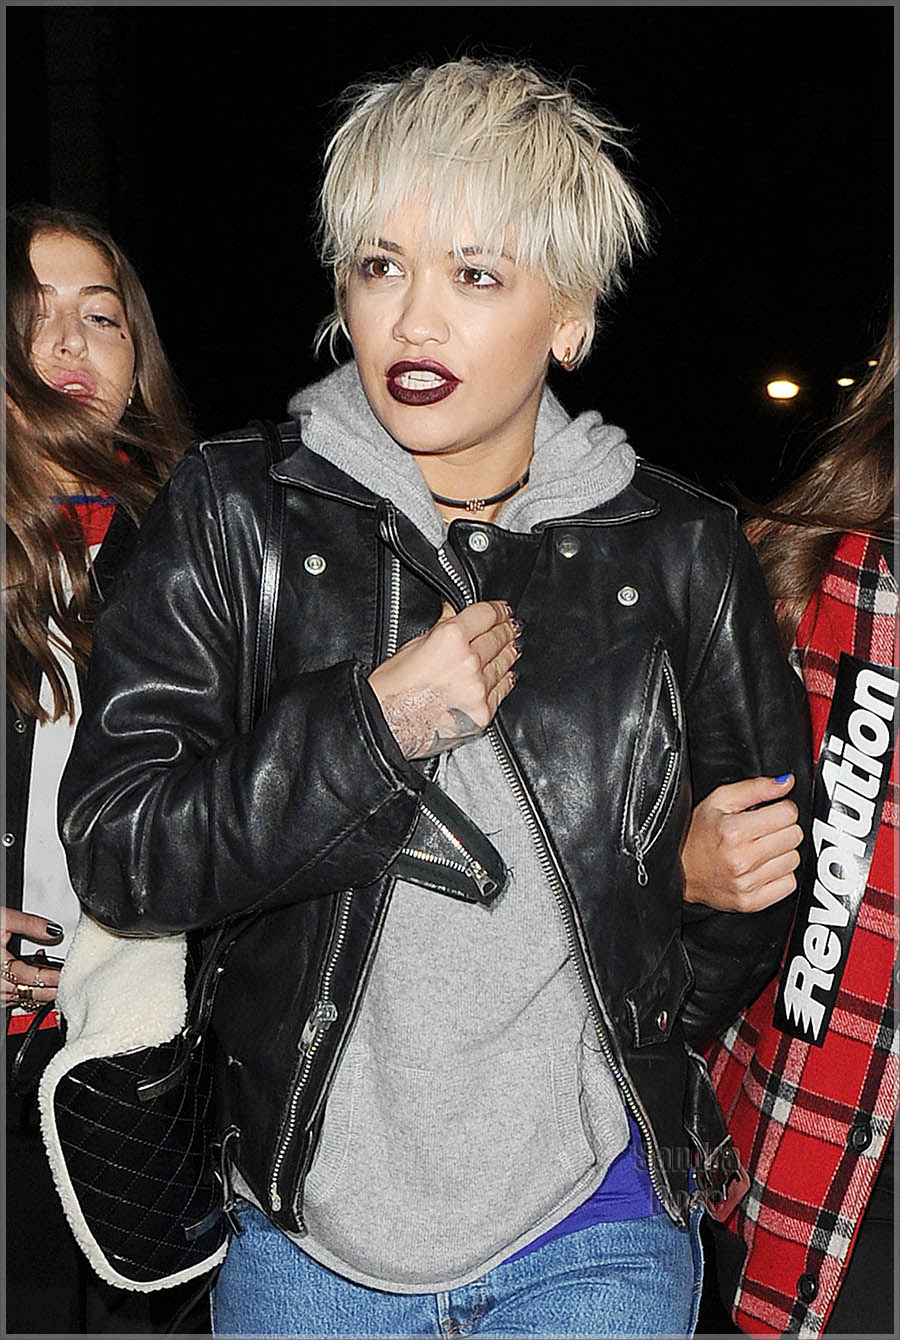 Rita Ora shows off her new blonde bob haircut, as she leaves Pizza Express in Notting Hill, with sister Elena Ora, and close friend Vas J Morgan